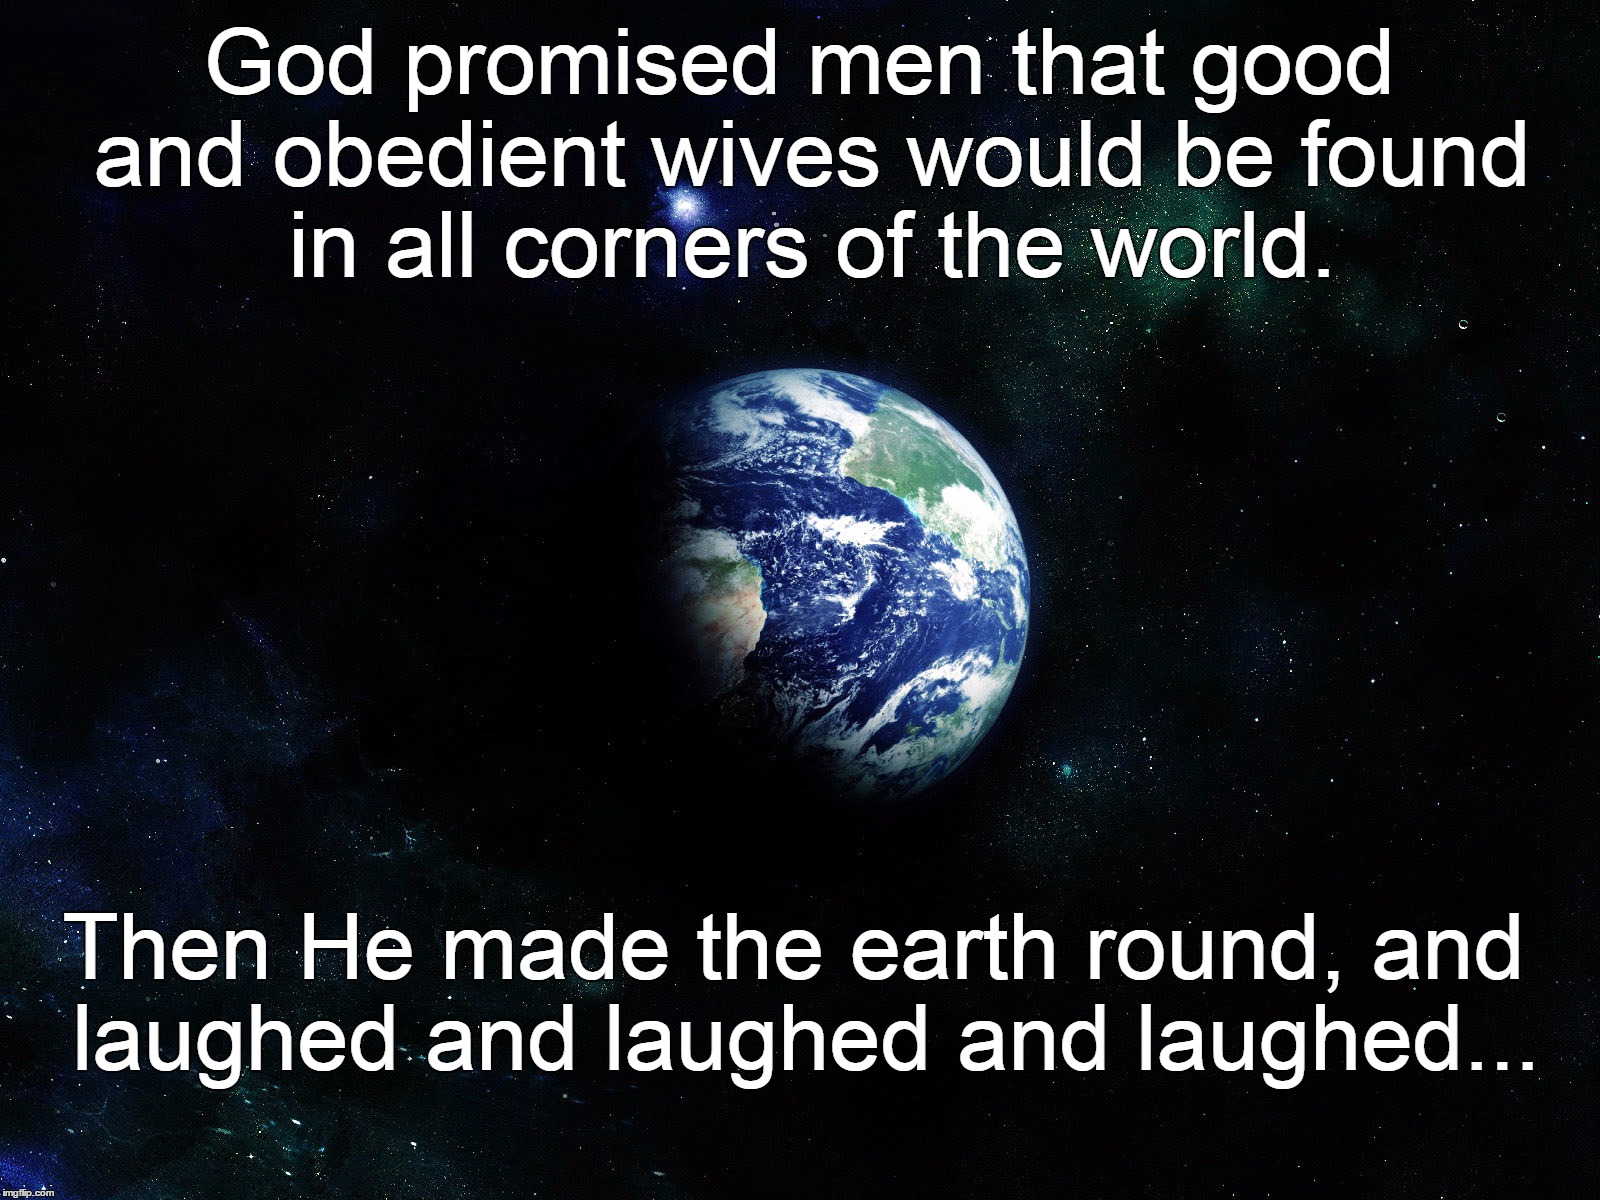 God promised men that good and obedient wives would be found in all corners of the world. Then He made the earth round, and laughed and laug | image tagged in earth | made w/ Imgflip meme maker